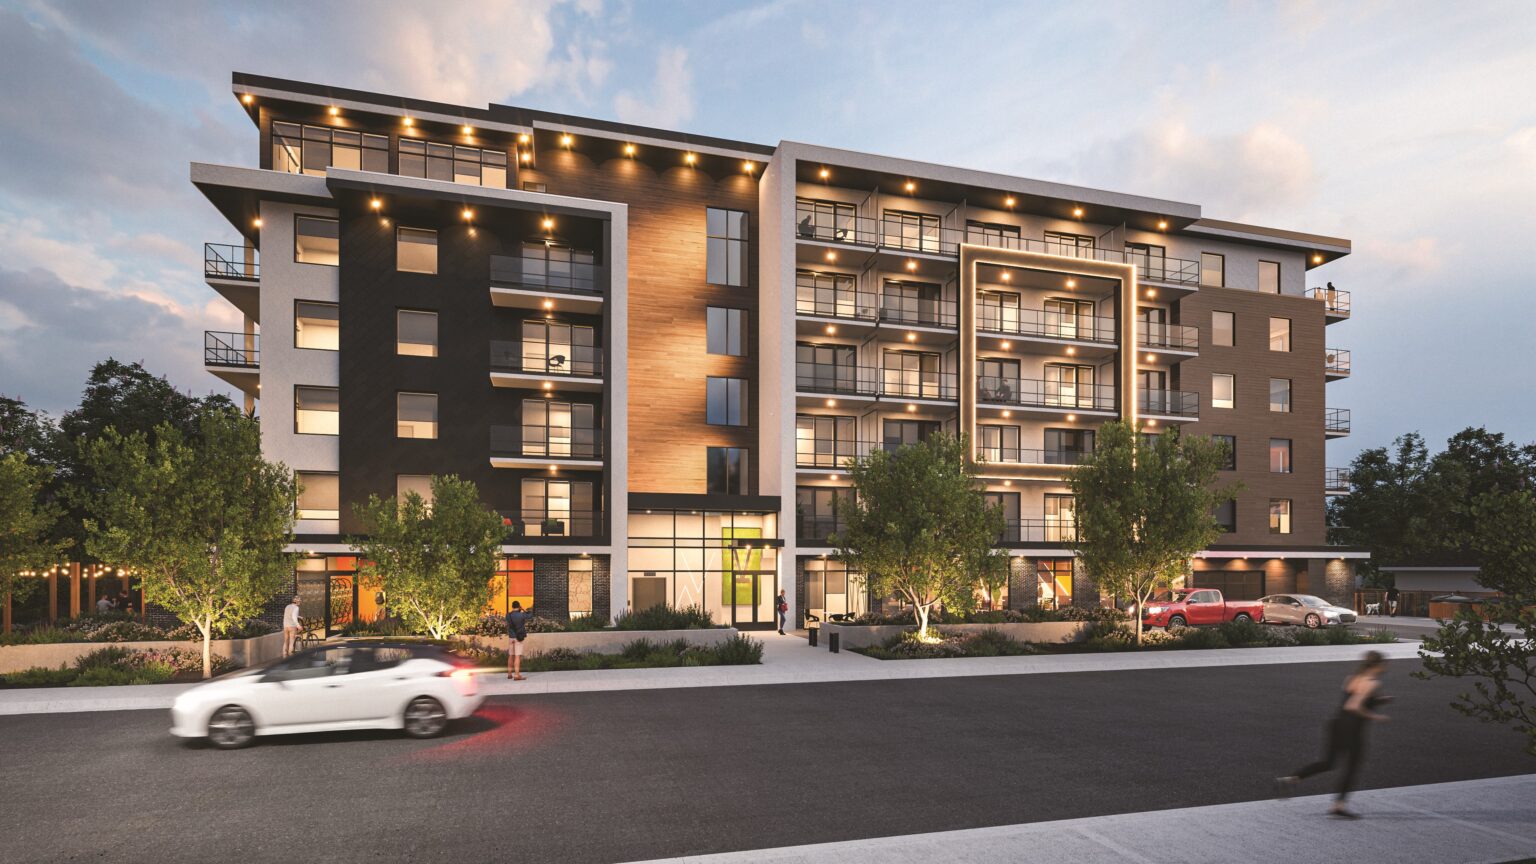 Five Crossings at Landmark by Millennial Developments – Prices, Availability, Plans